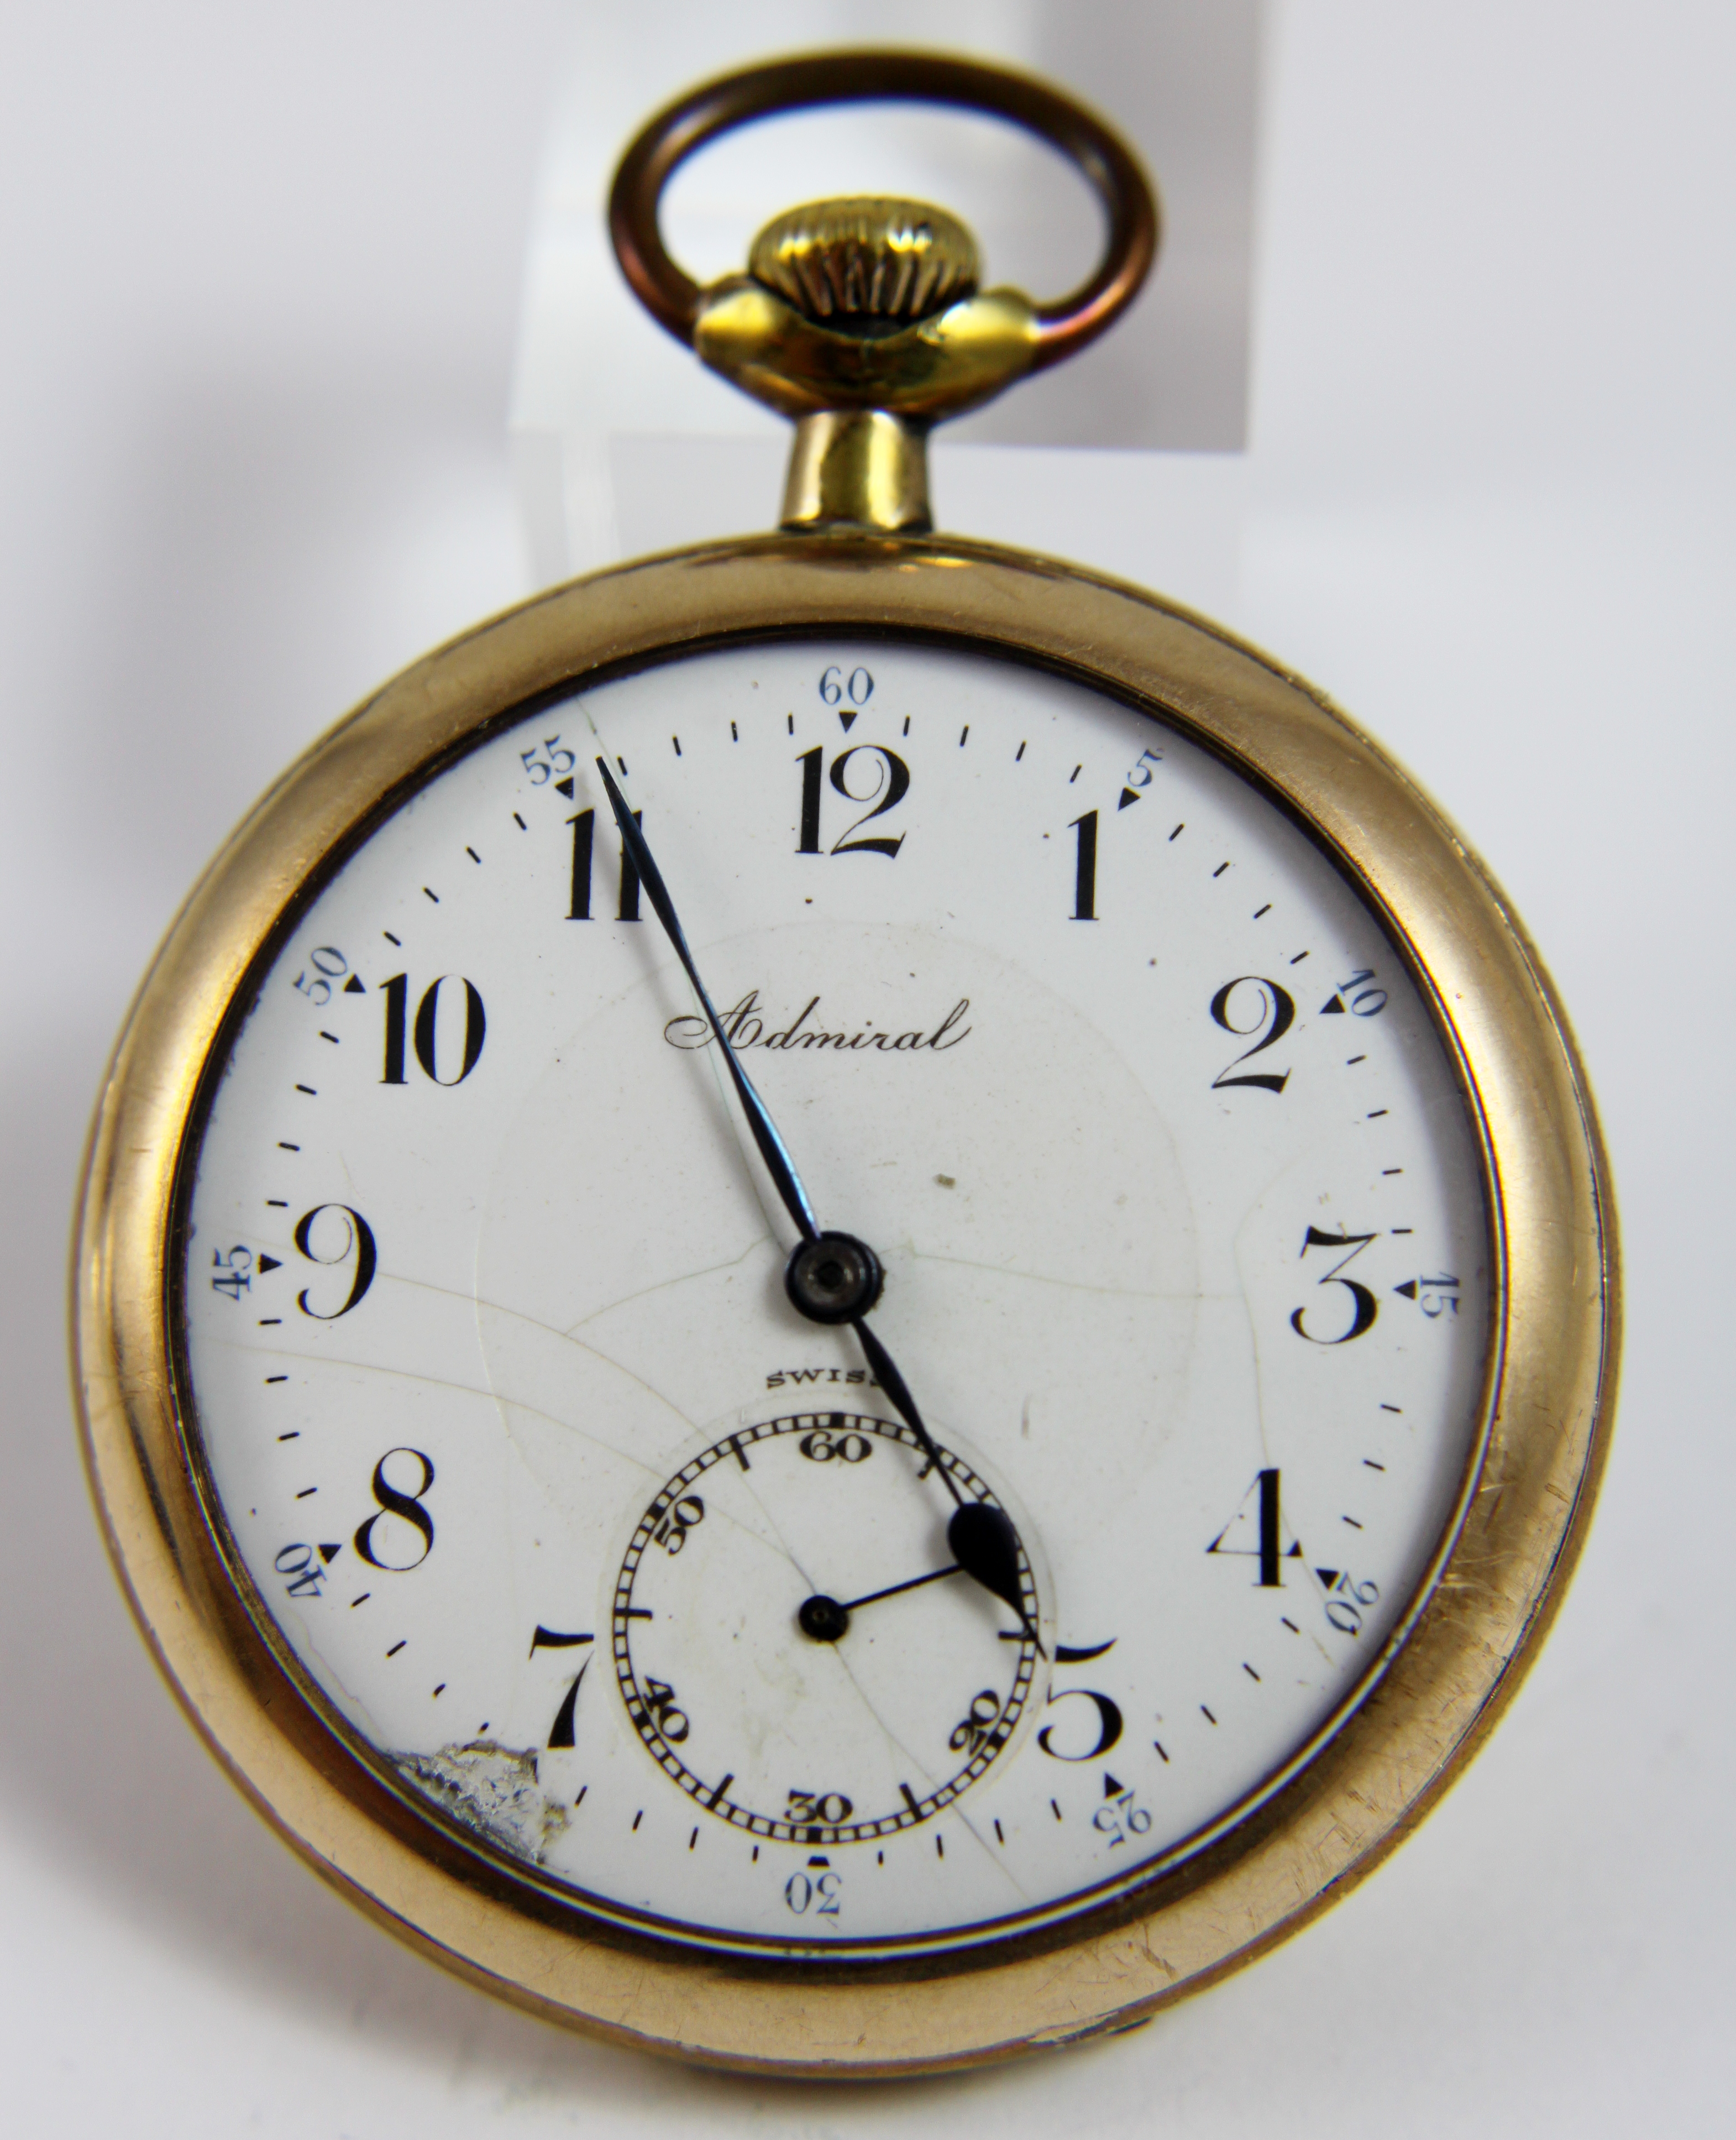 Admiral pocket watch by Tacy Watch Company, Fortune gold filled case No 1913665, Swiss movement, pat - Image 2 of 2